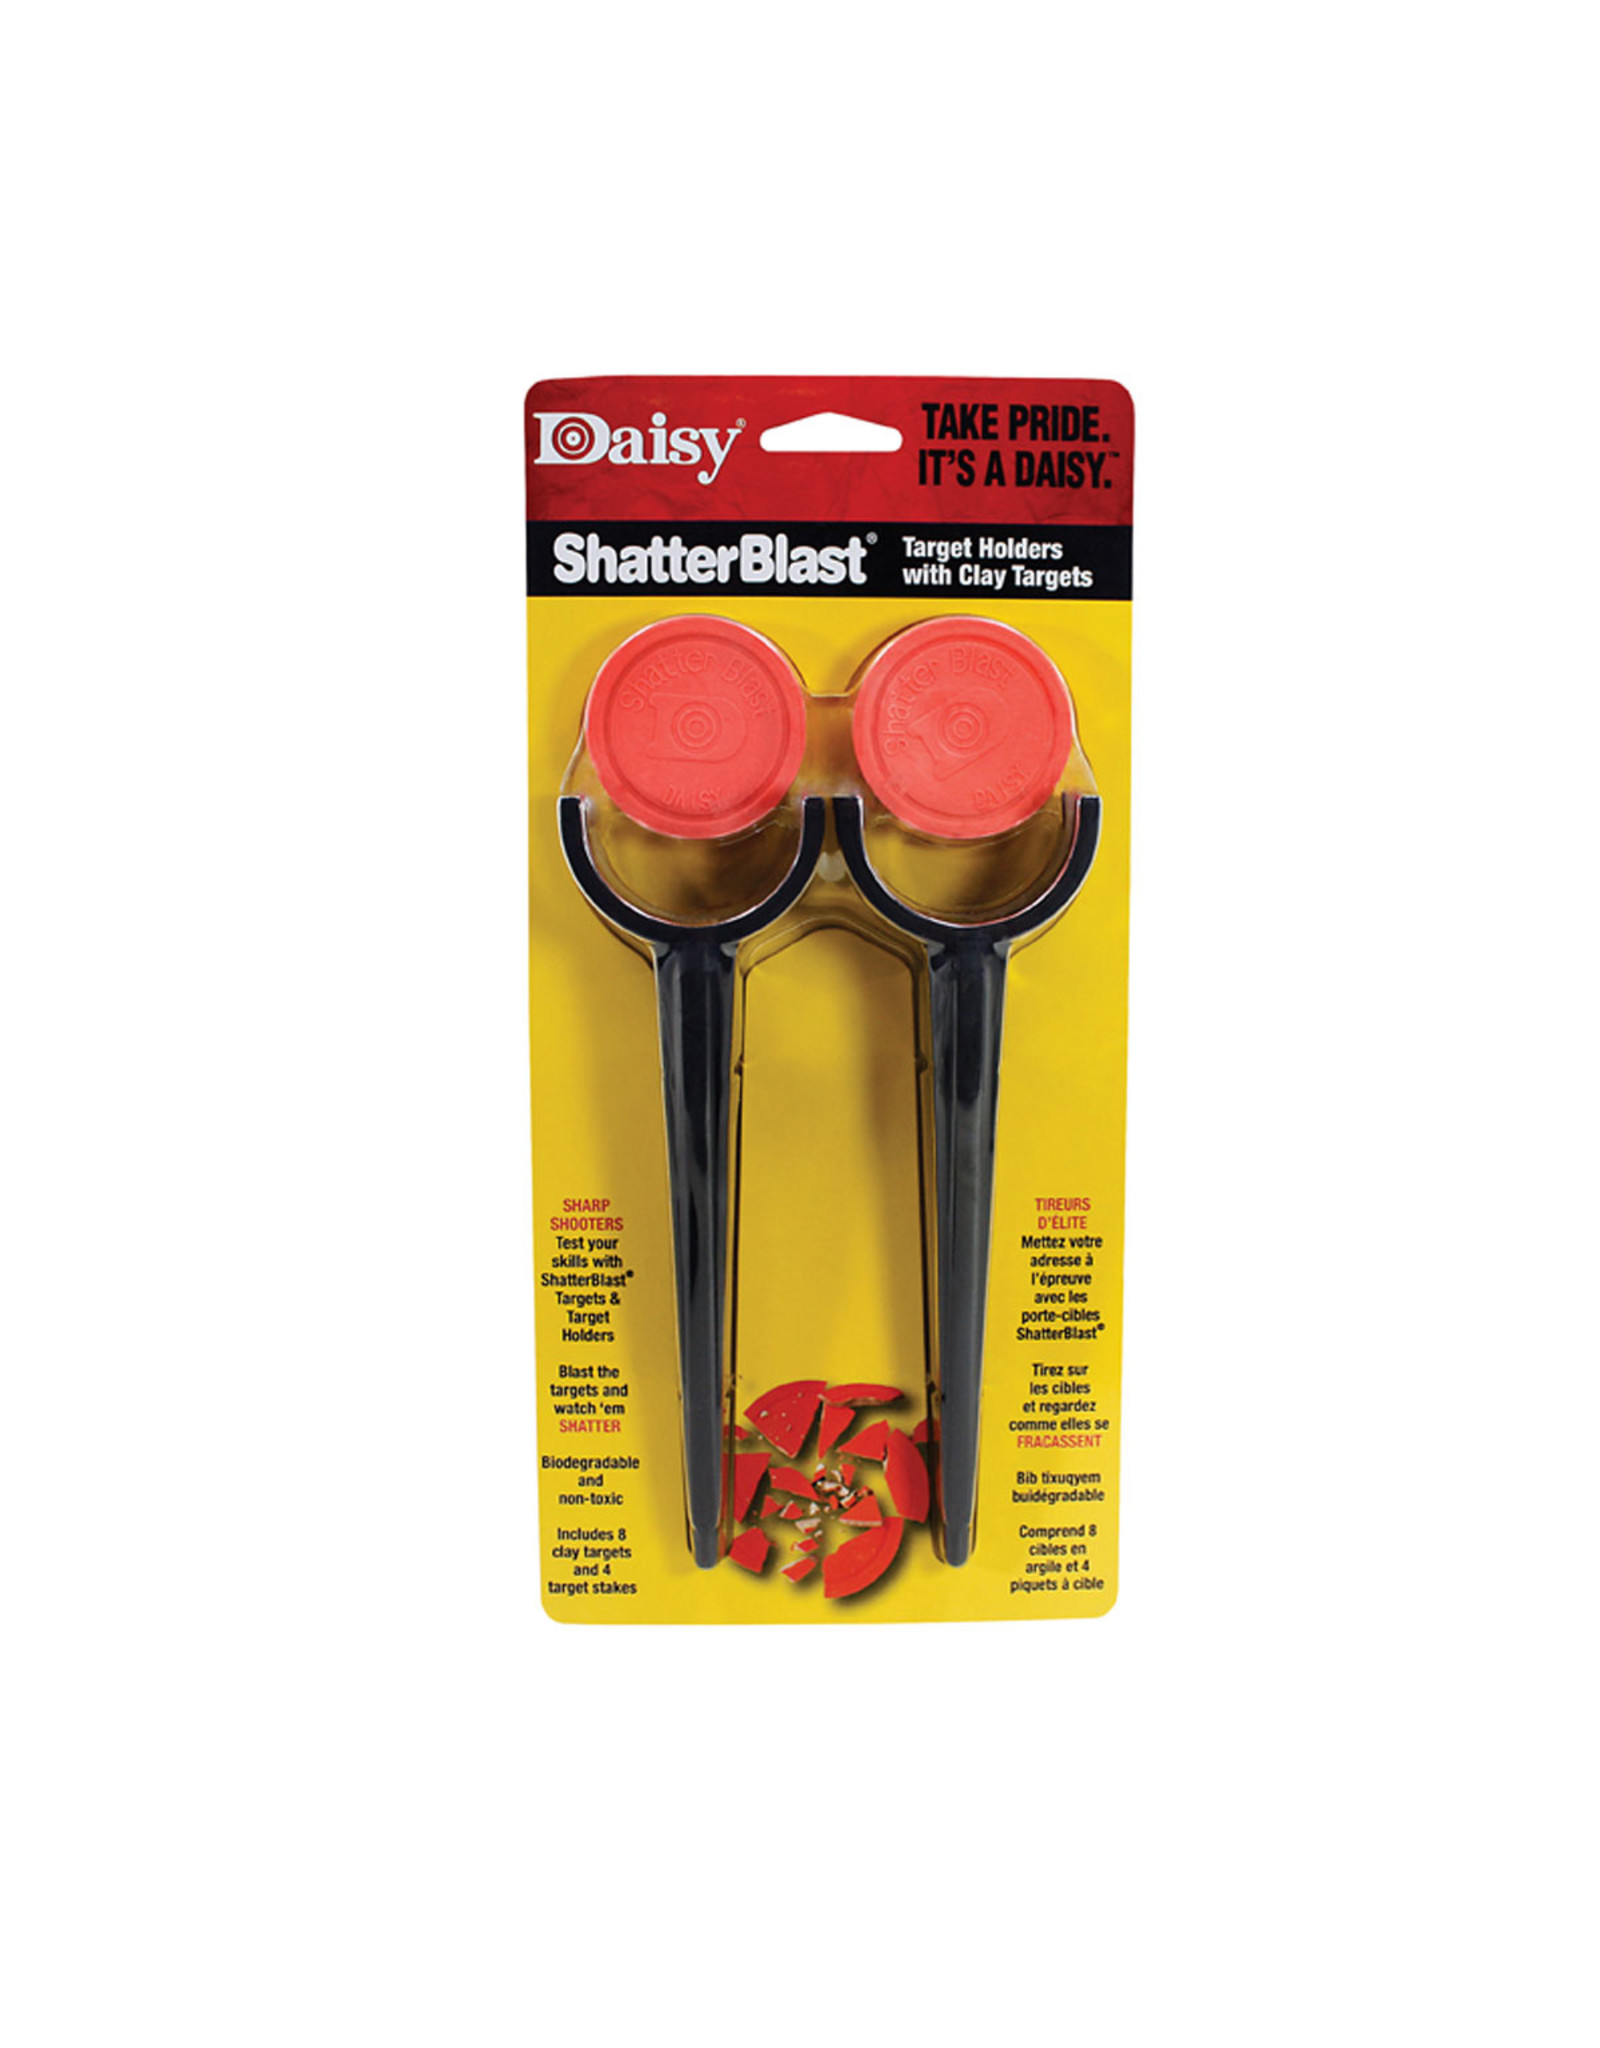 DAISY SHATTER BLAST TARGET HOLDER WITH CLAY TARGETS